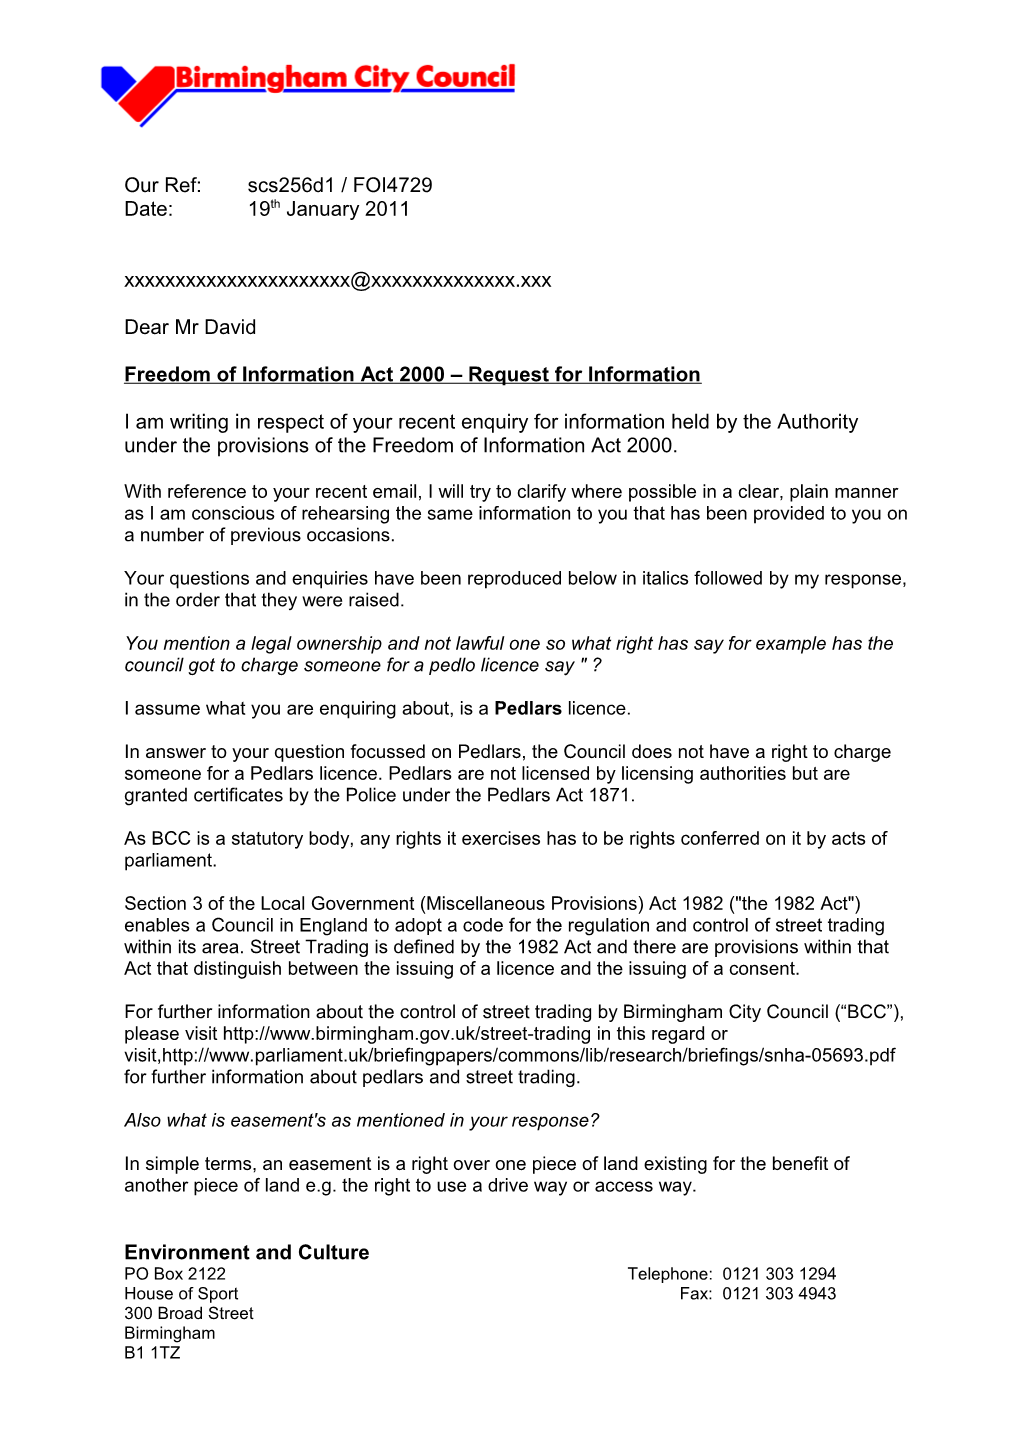 Freedom of Information Act 2000 Request for Information